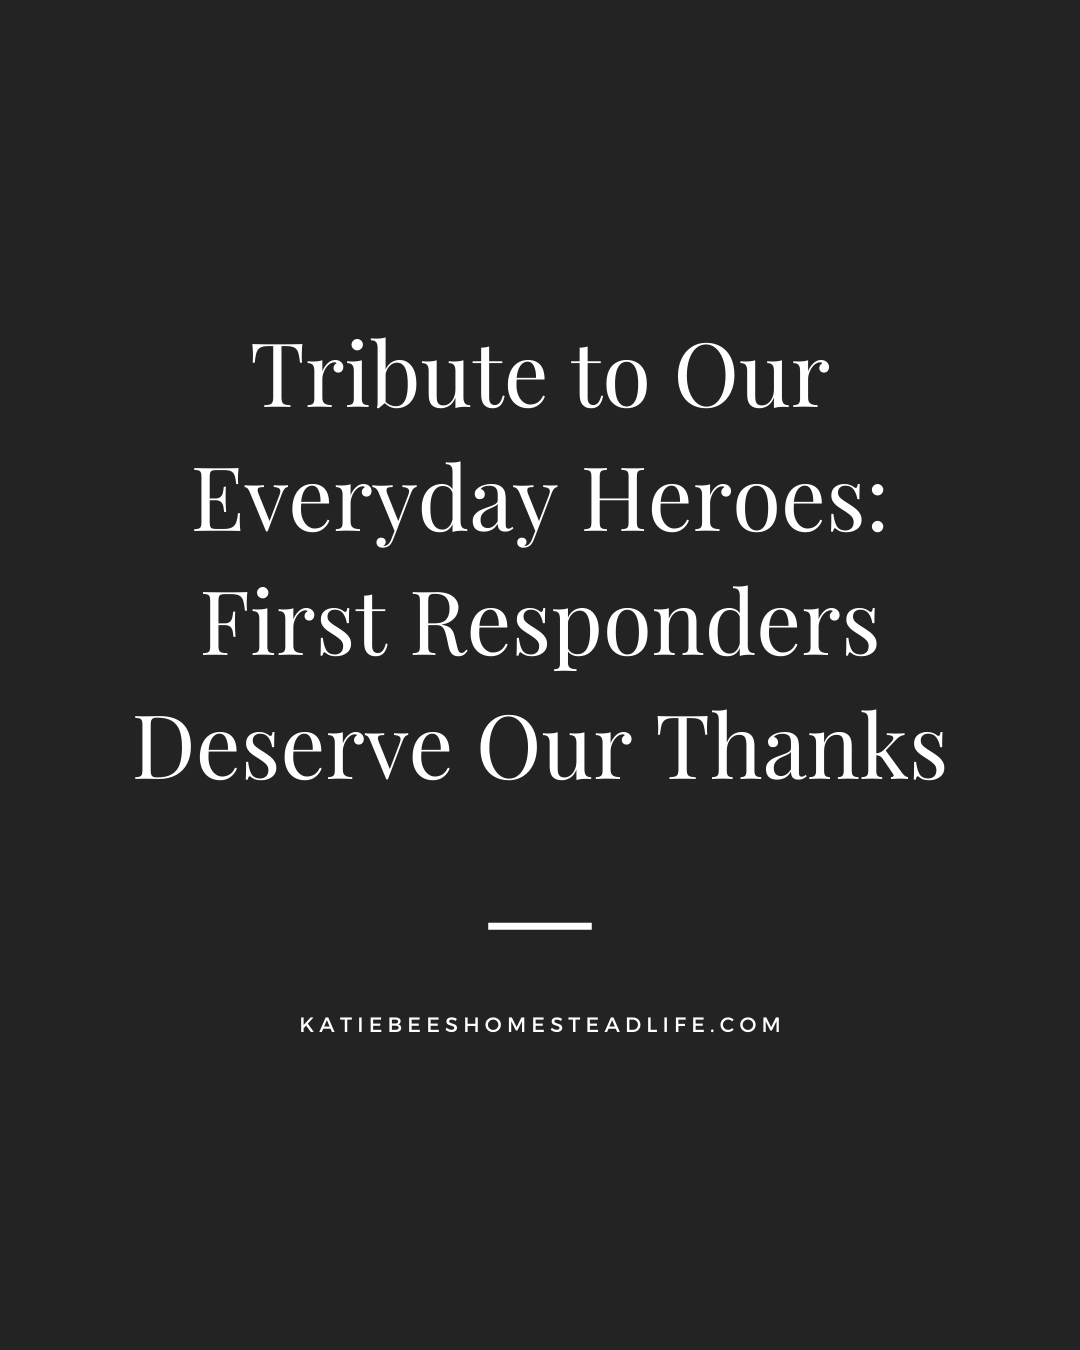 Tribute to Our Everyday Heroes: First Responders Deserve Our Thanks